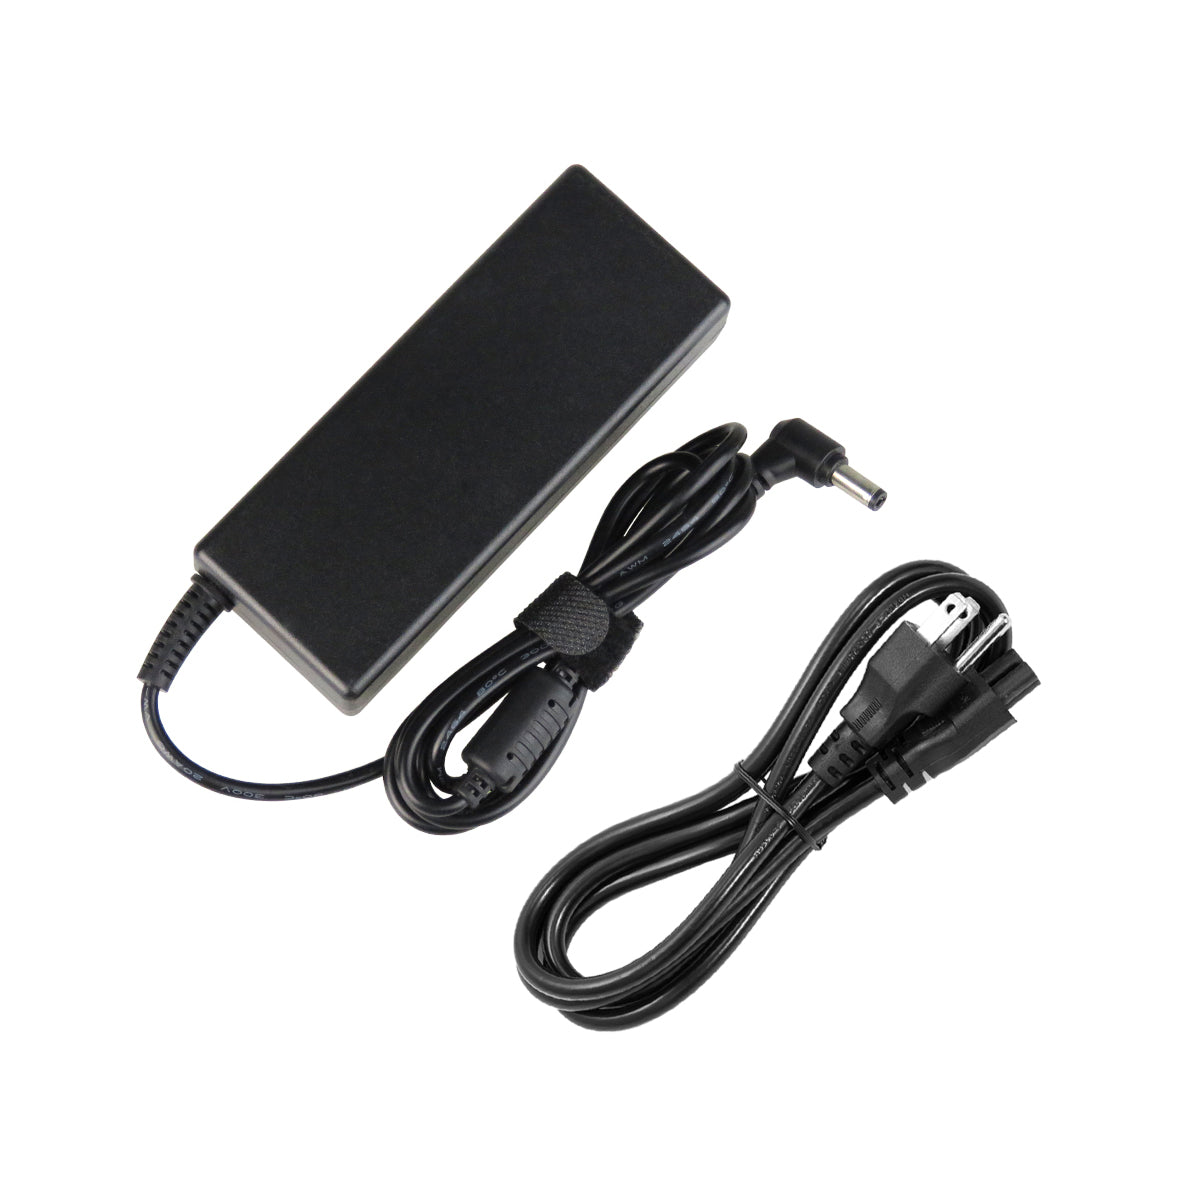 AC Adapter Charger for ASUS ul30jt Series Notebook.